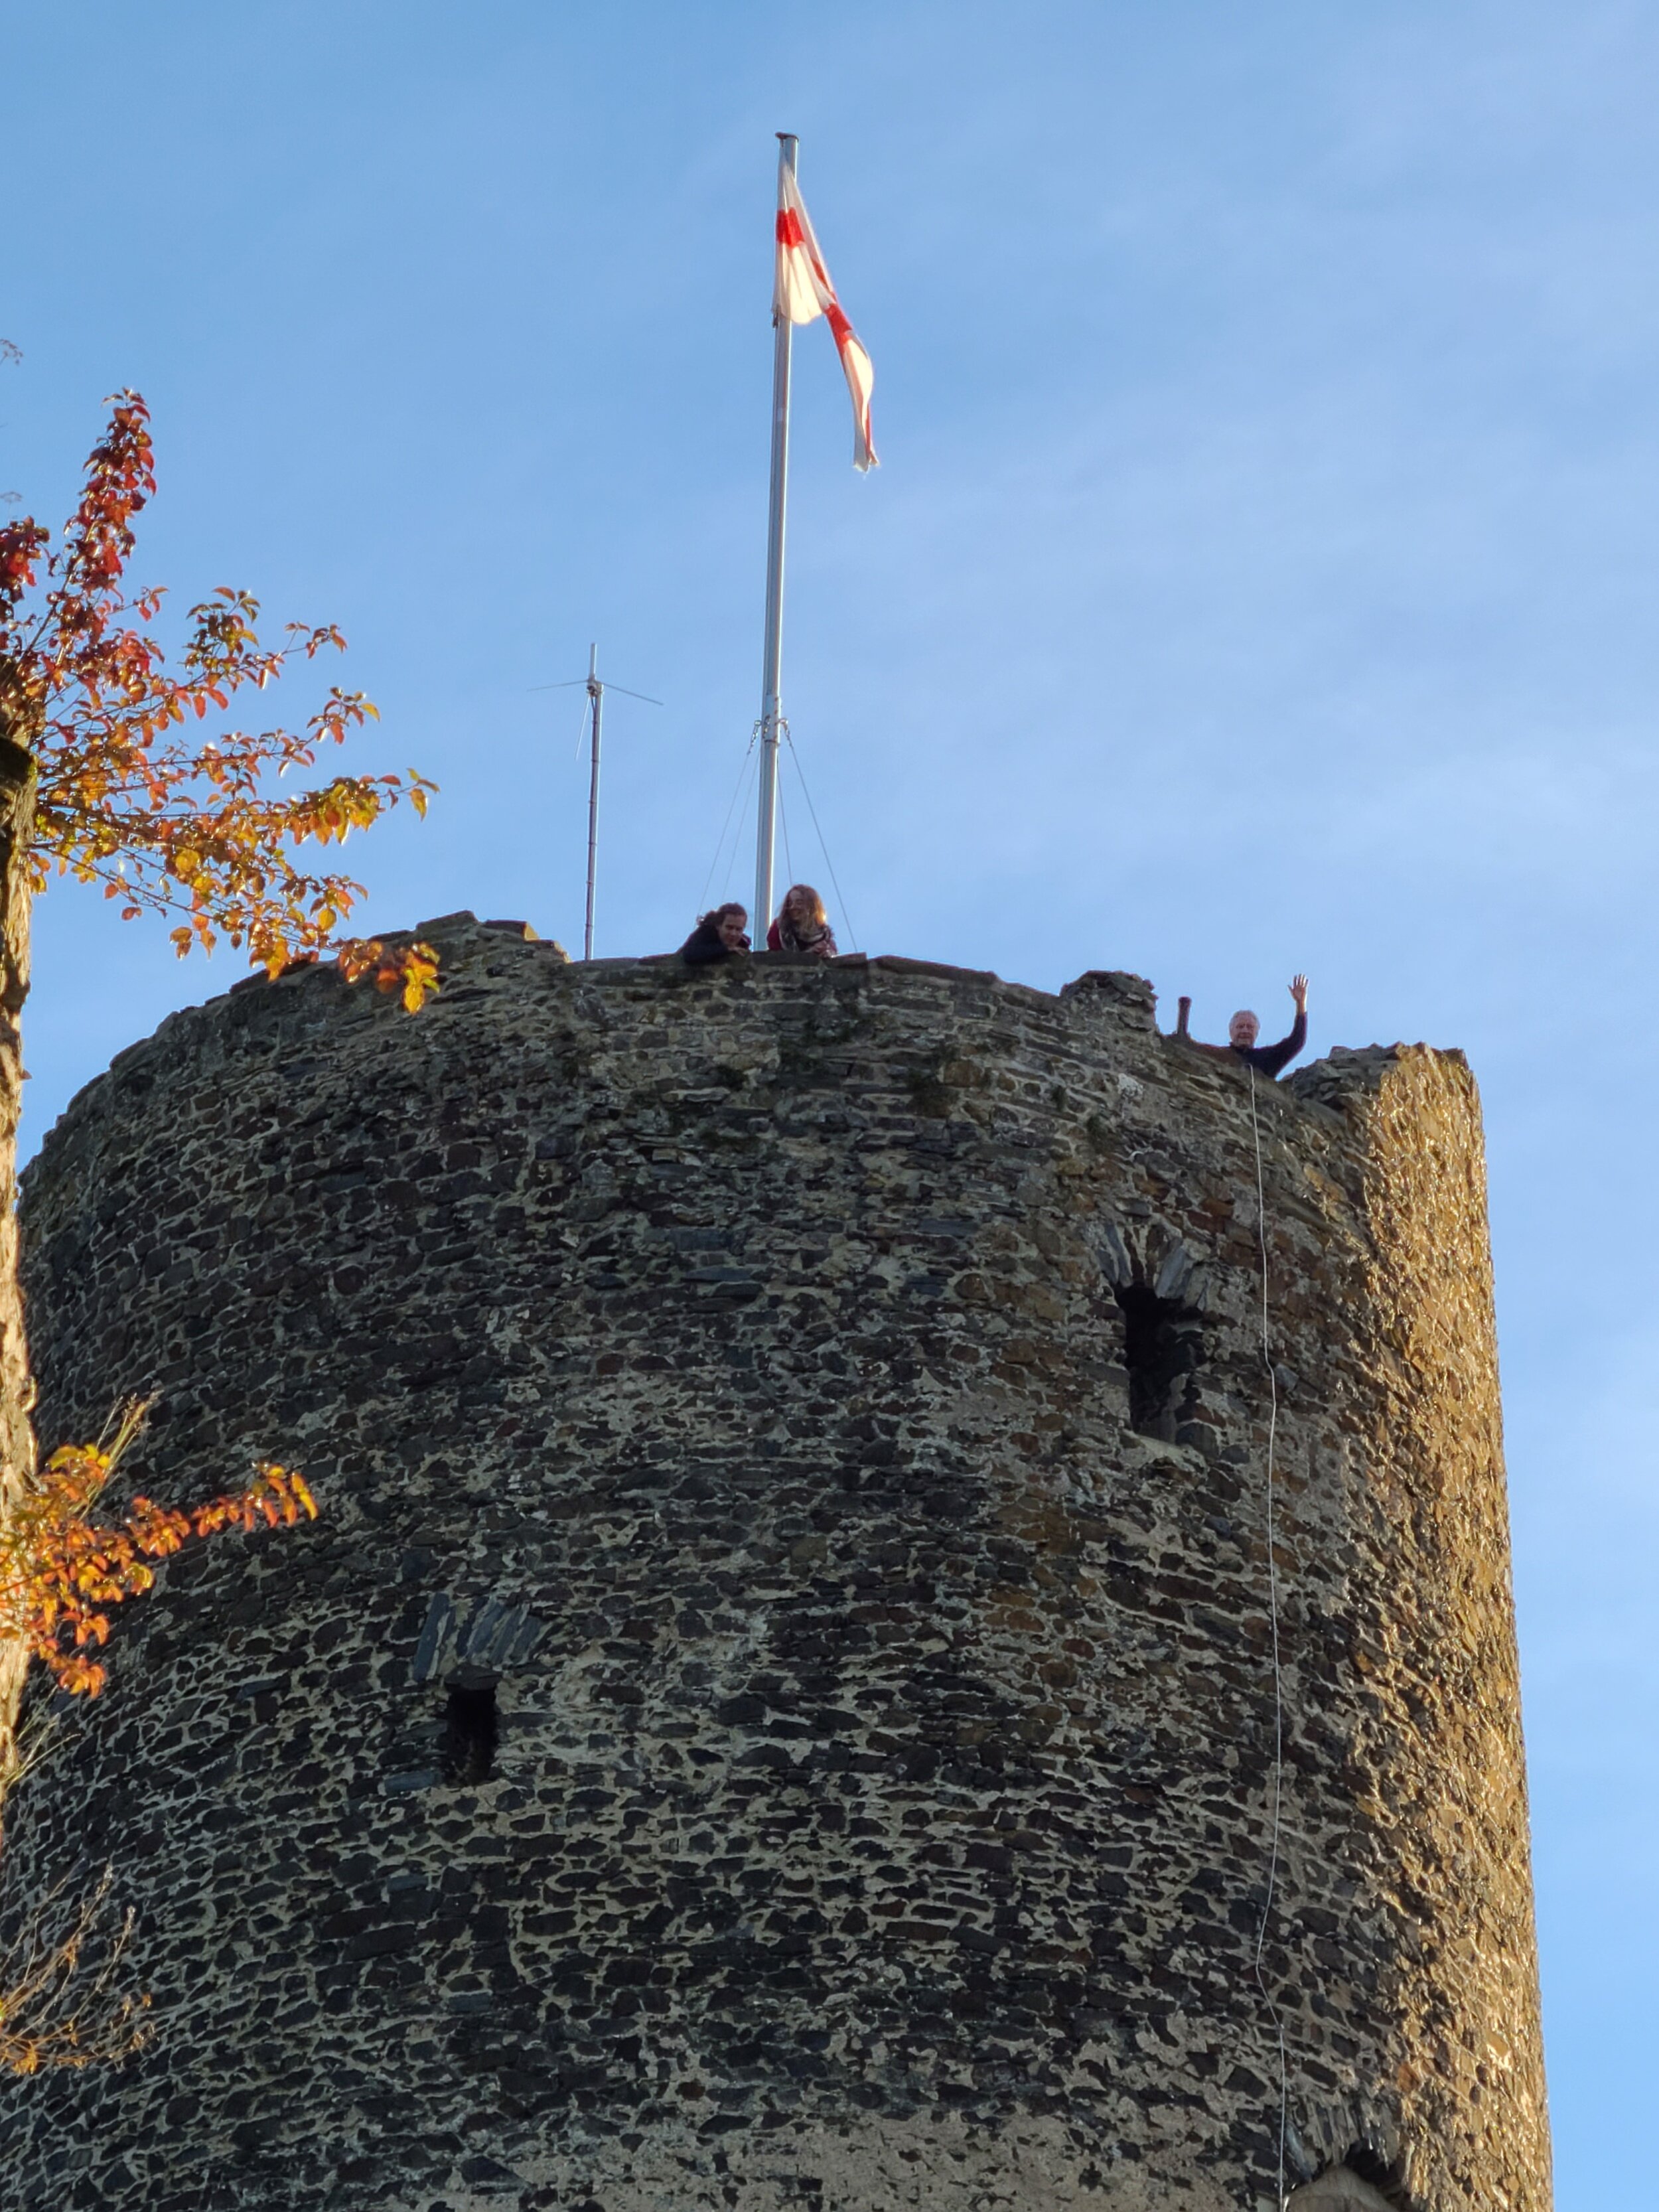  Landshut Castle at Bernkastle-Kues. Blaine at the top right waving! 